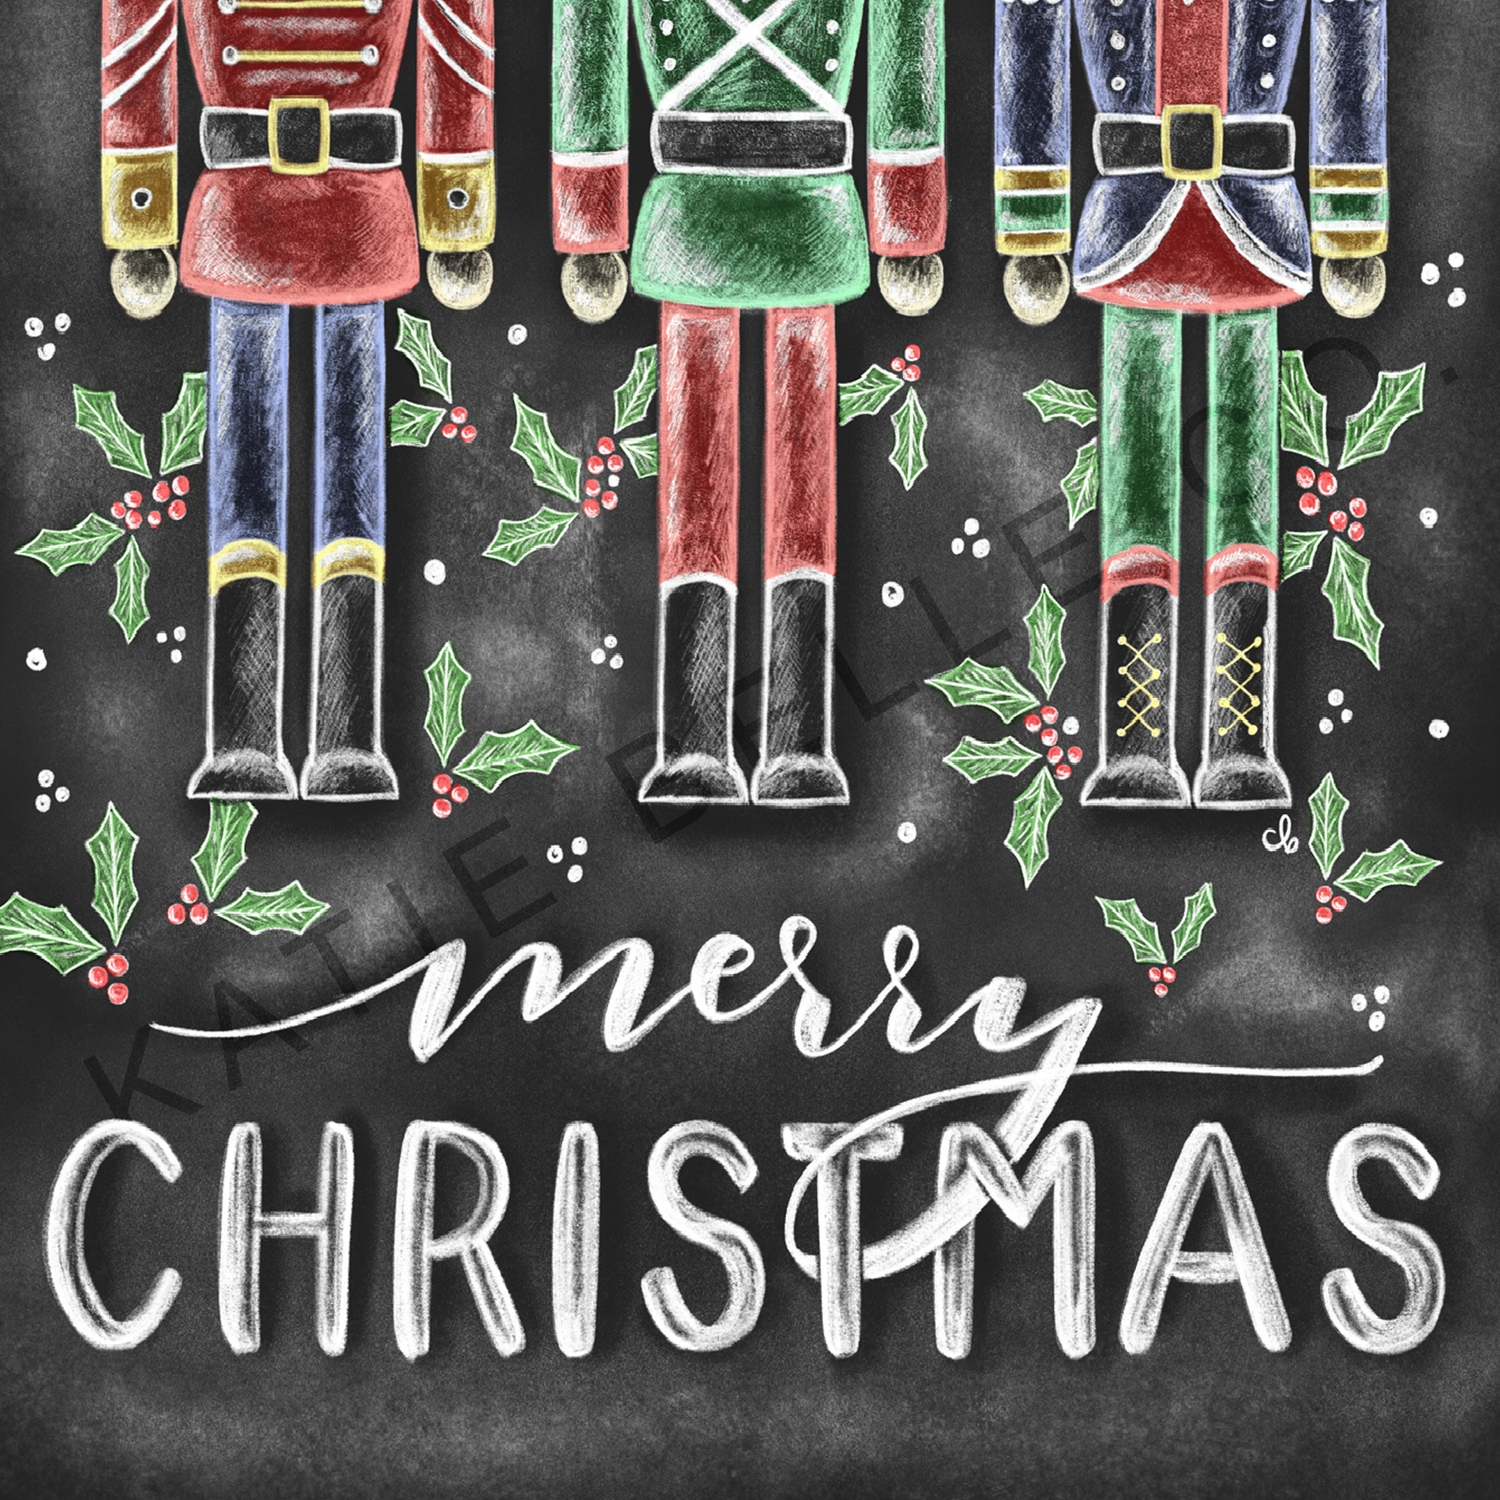 Merry Christmas. Merry Christmas Nutcrackers. 3 Nutcrackers. Holly leaves and berries accent. Christmas Decor. Holiday Decor. Holiday Art. Chalkboard Print. Chalk Art. Classic Christmas colors. 8 x 10 print. 5 x 7 print. unframed art. katie belle co